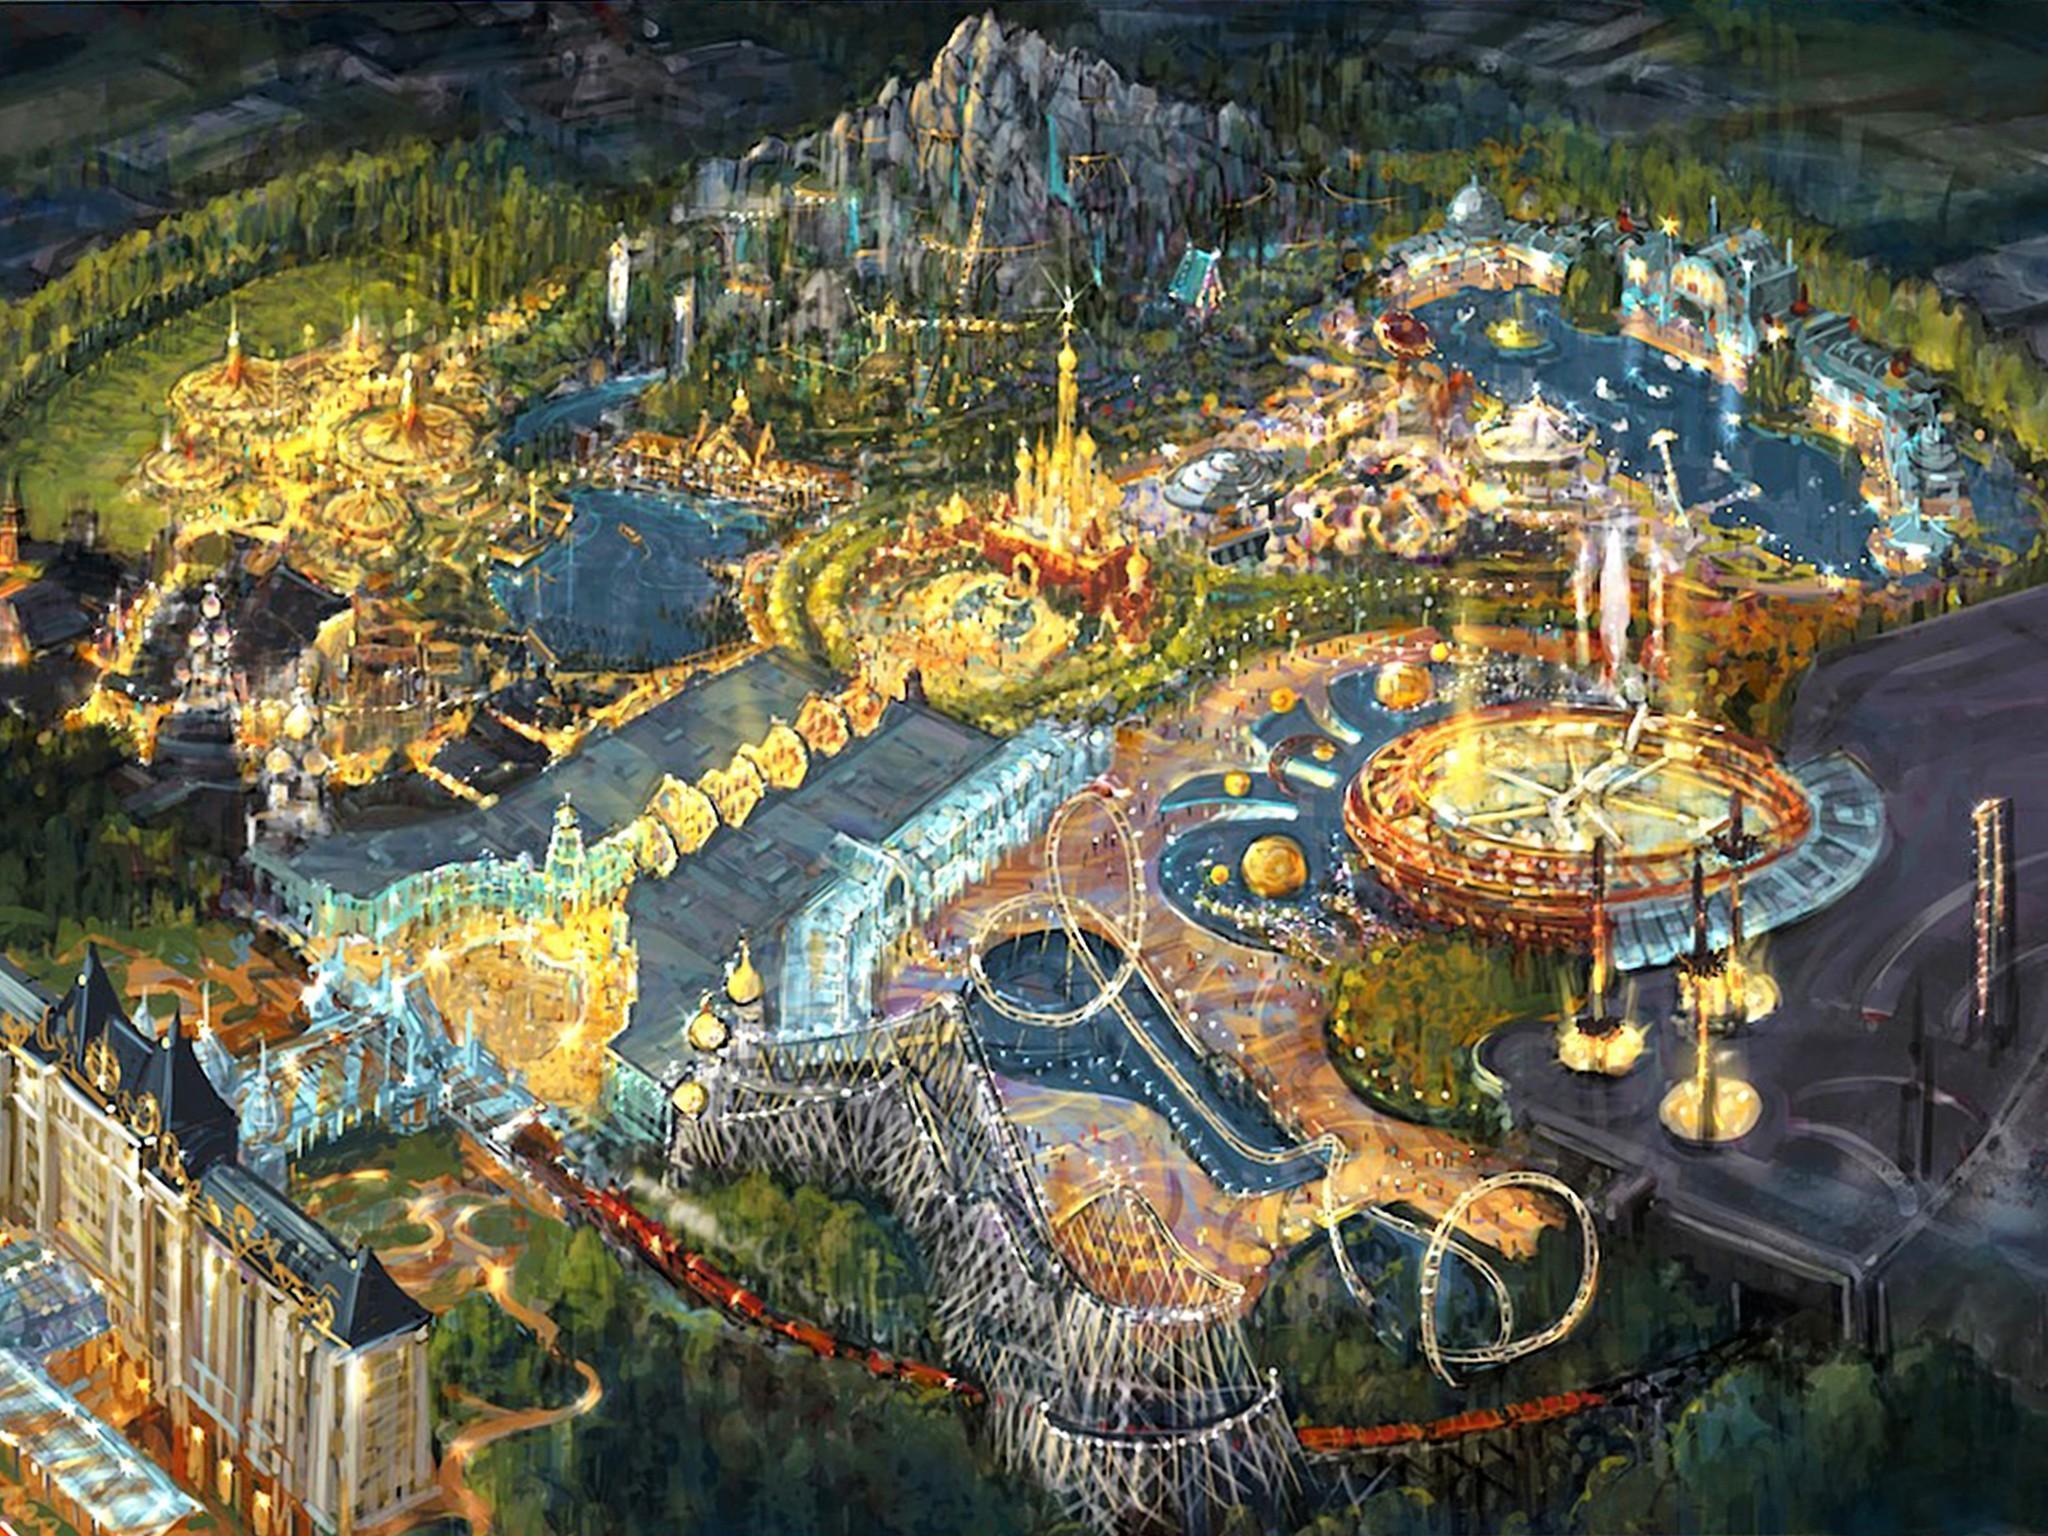 Putin gives blessing to Russian theme park designed by North Hollywood